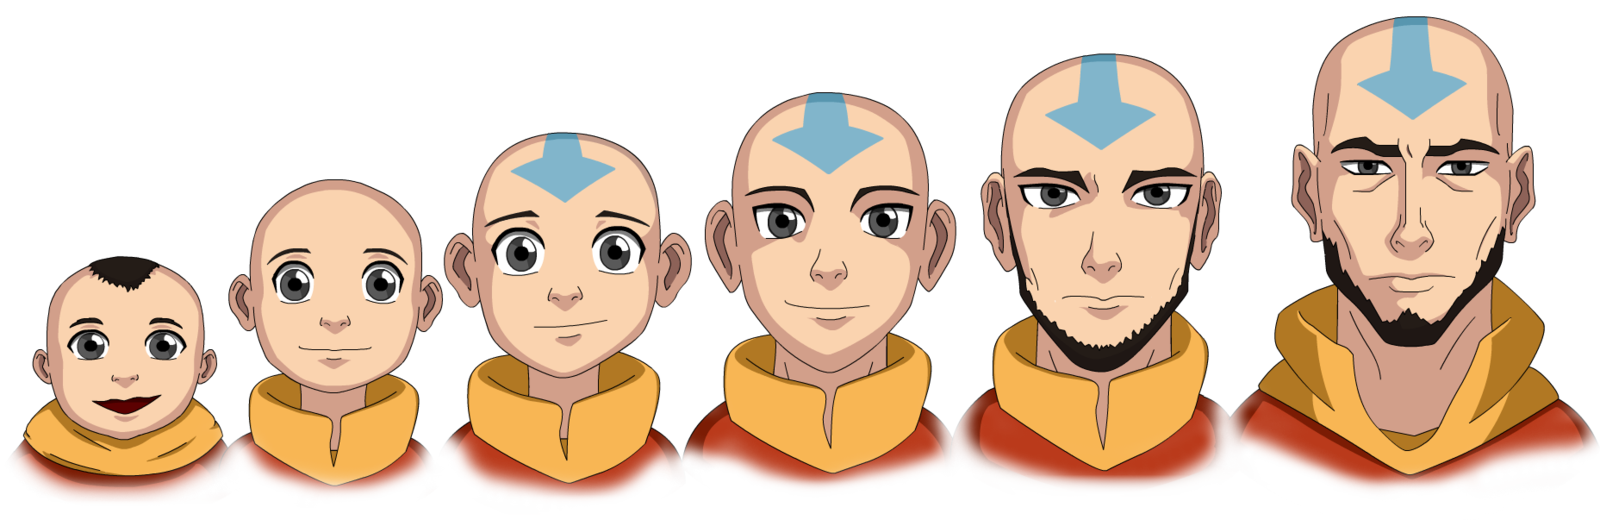 25 Weird Things About Aangs Anatomy In Avatar The Last Airbender 2022